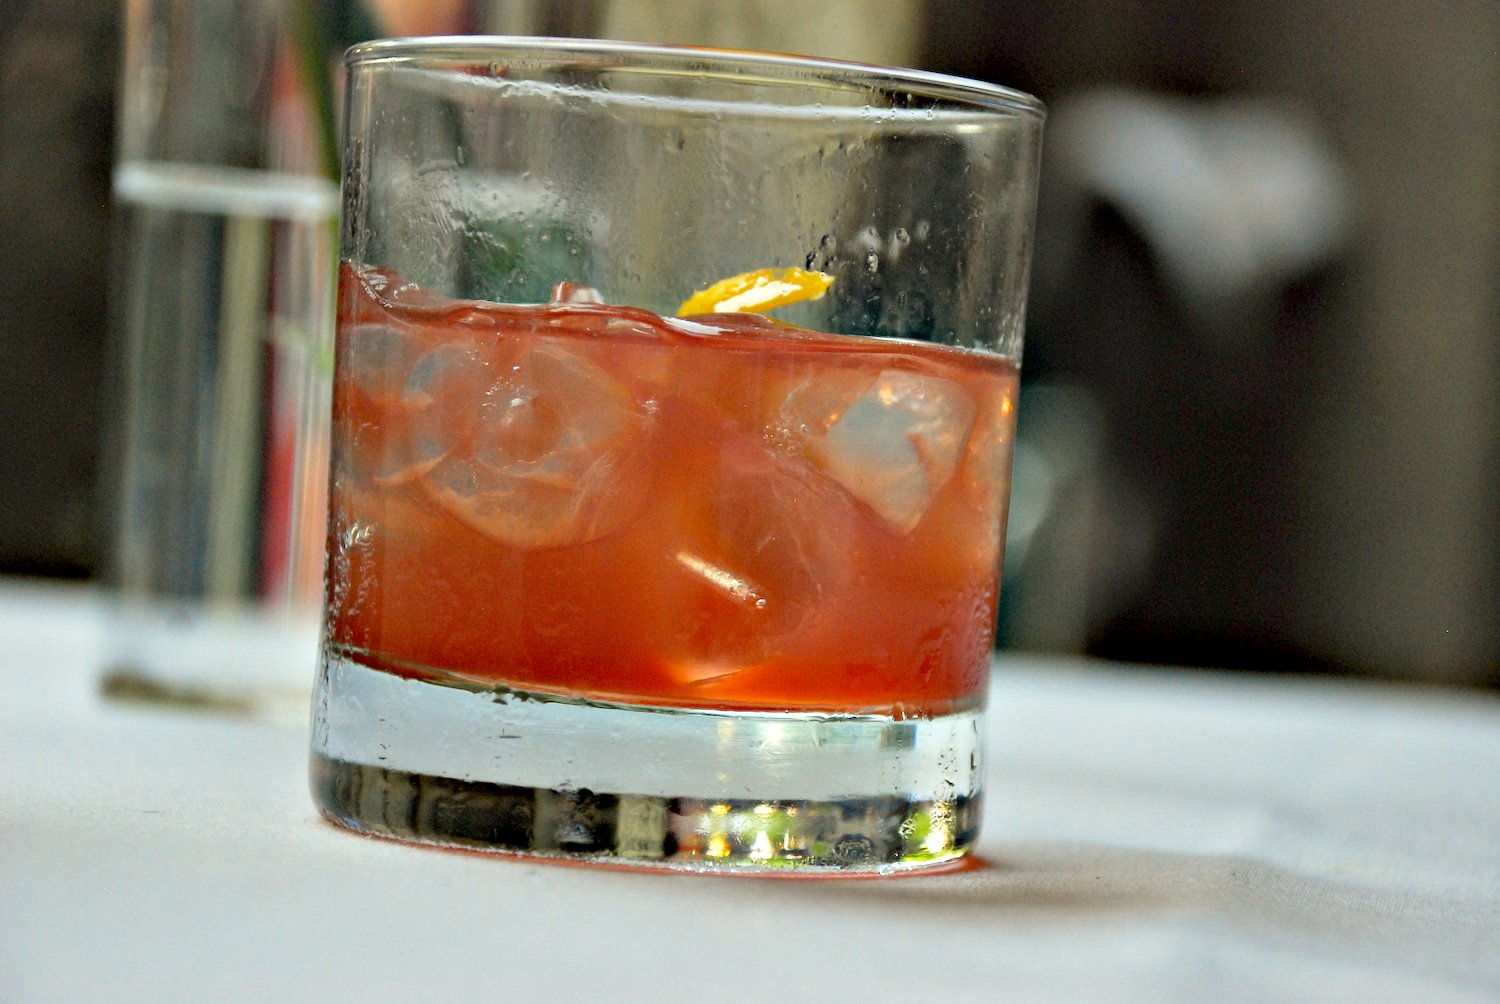 Photograph of a bourbon cocktail in a clear drinking glass. The liquid in the glass looks dark pink. The drink has ice cubes in it and perhaps a slice of lemon.